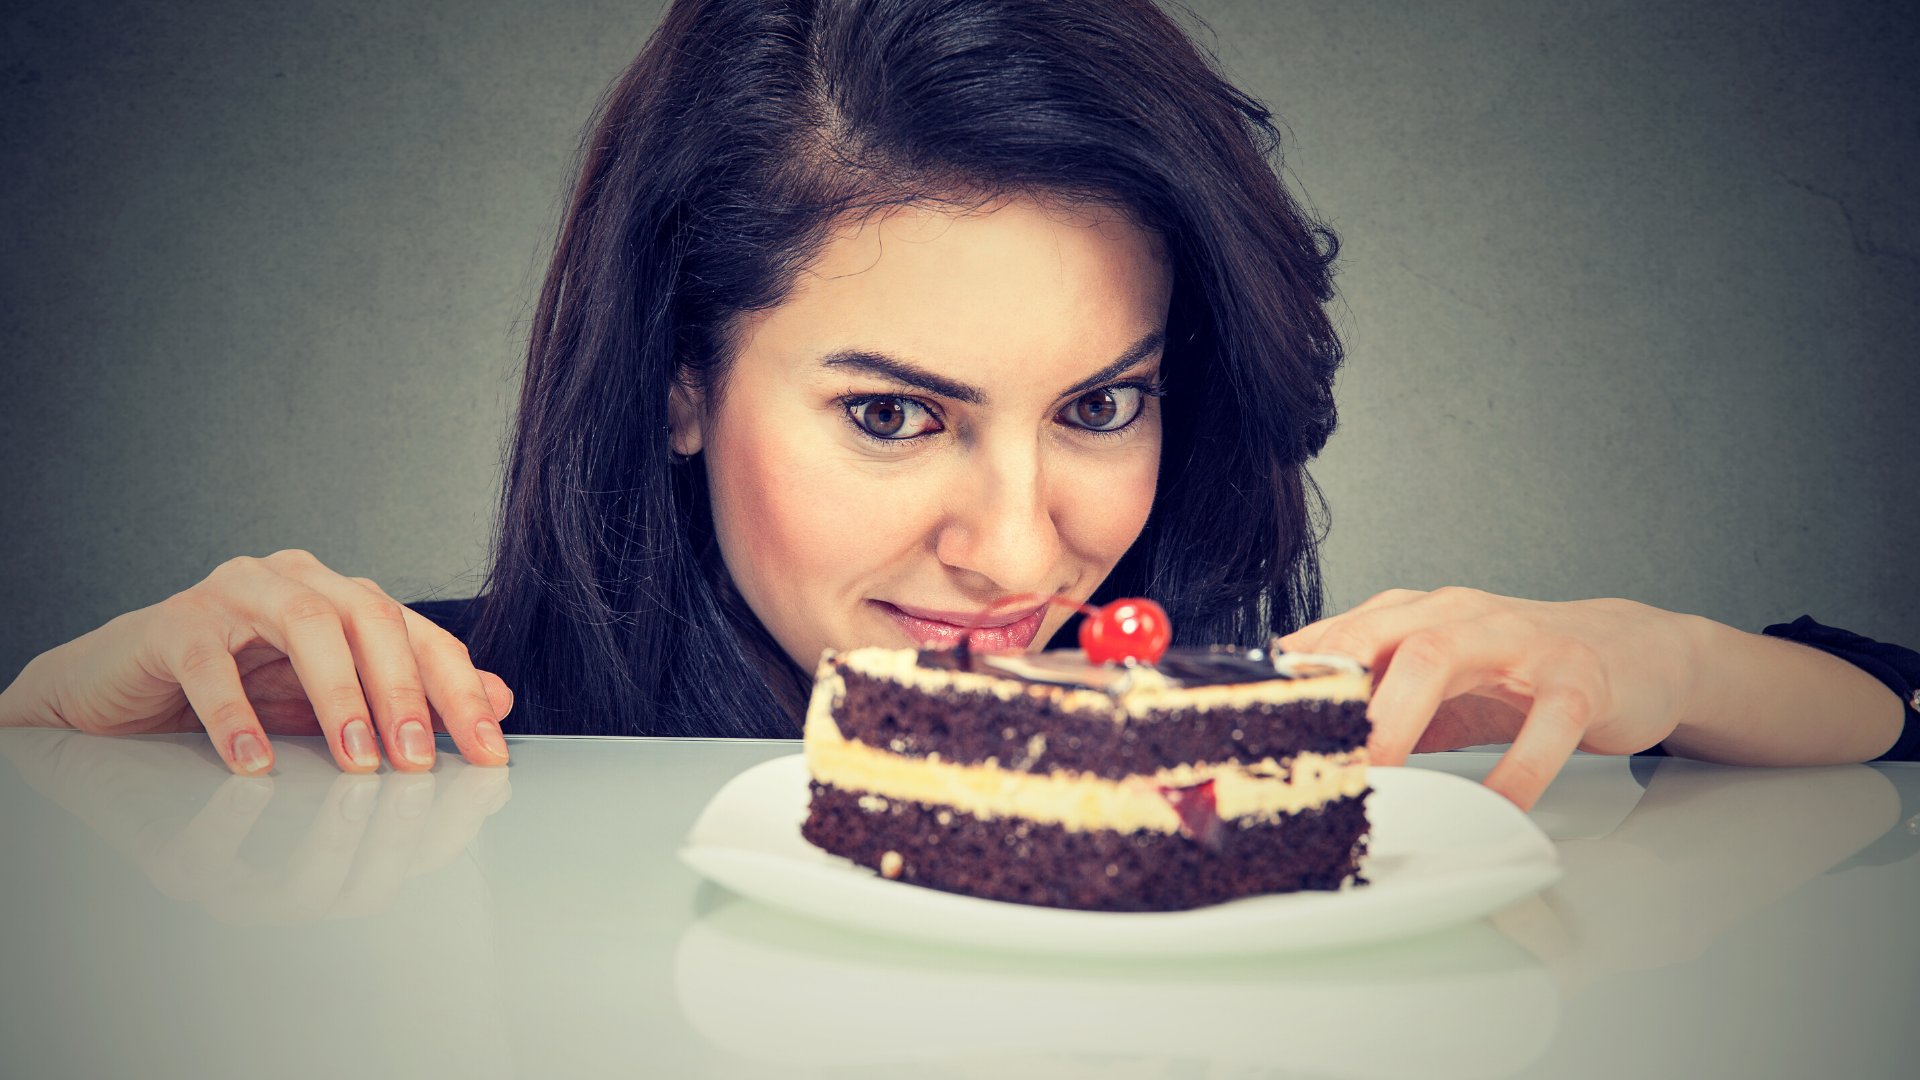 Maybe you've considered intuitive eating for weight loss. It does have wonderful benefits from healing your relationship with food, to saying goodbye to diets forever. But there are some things to understand